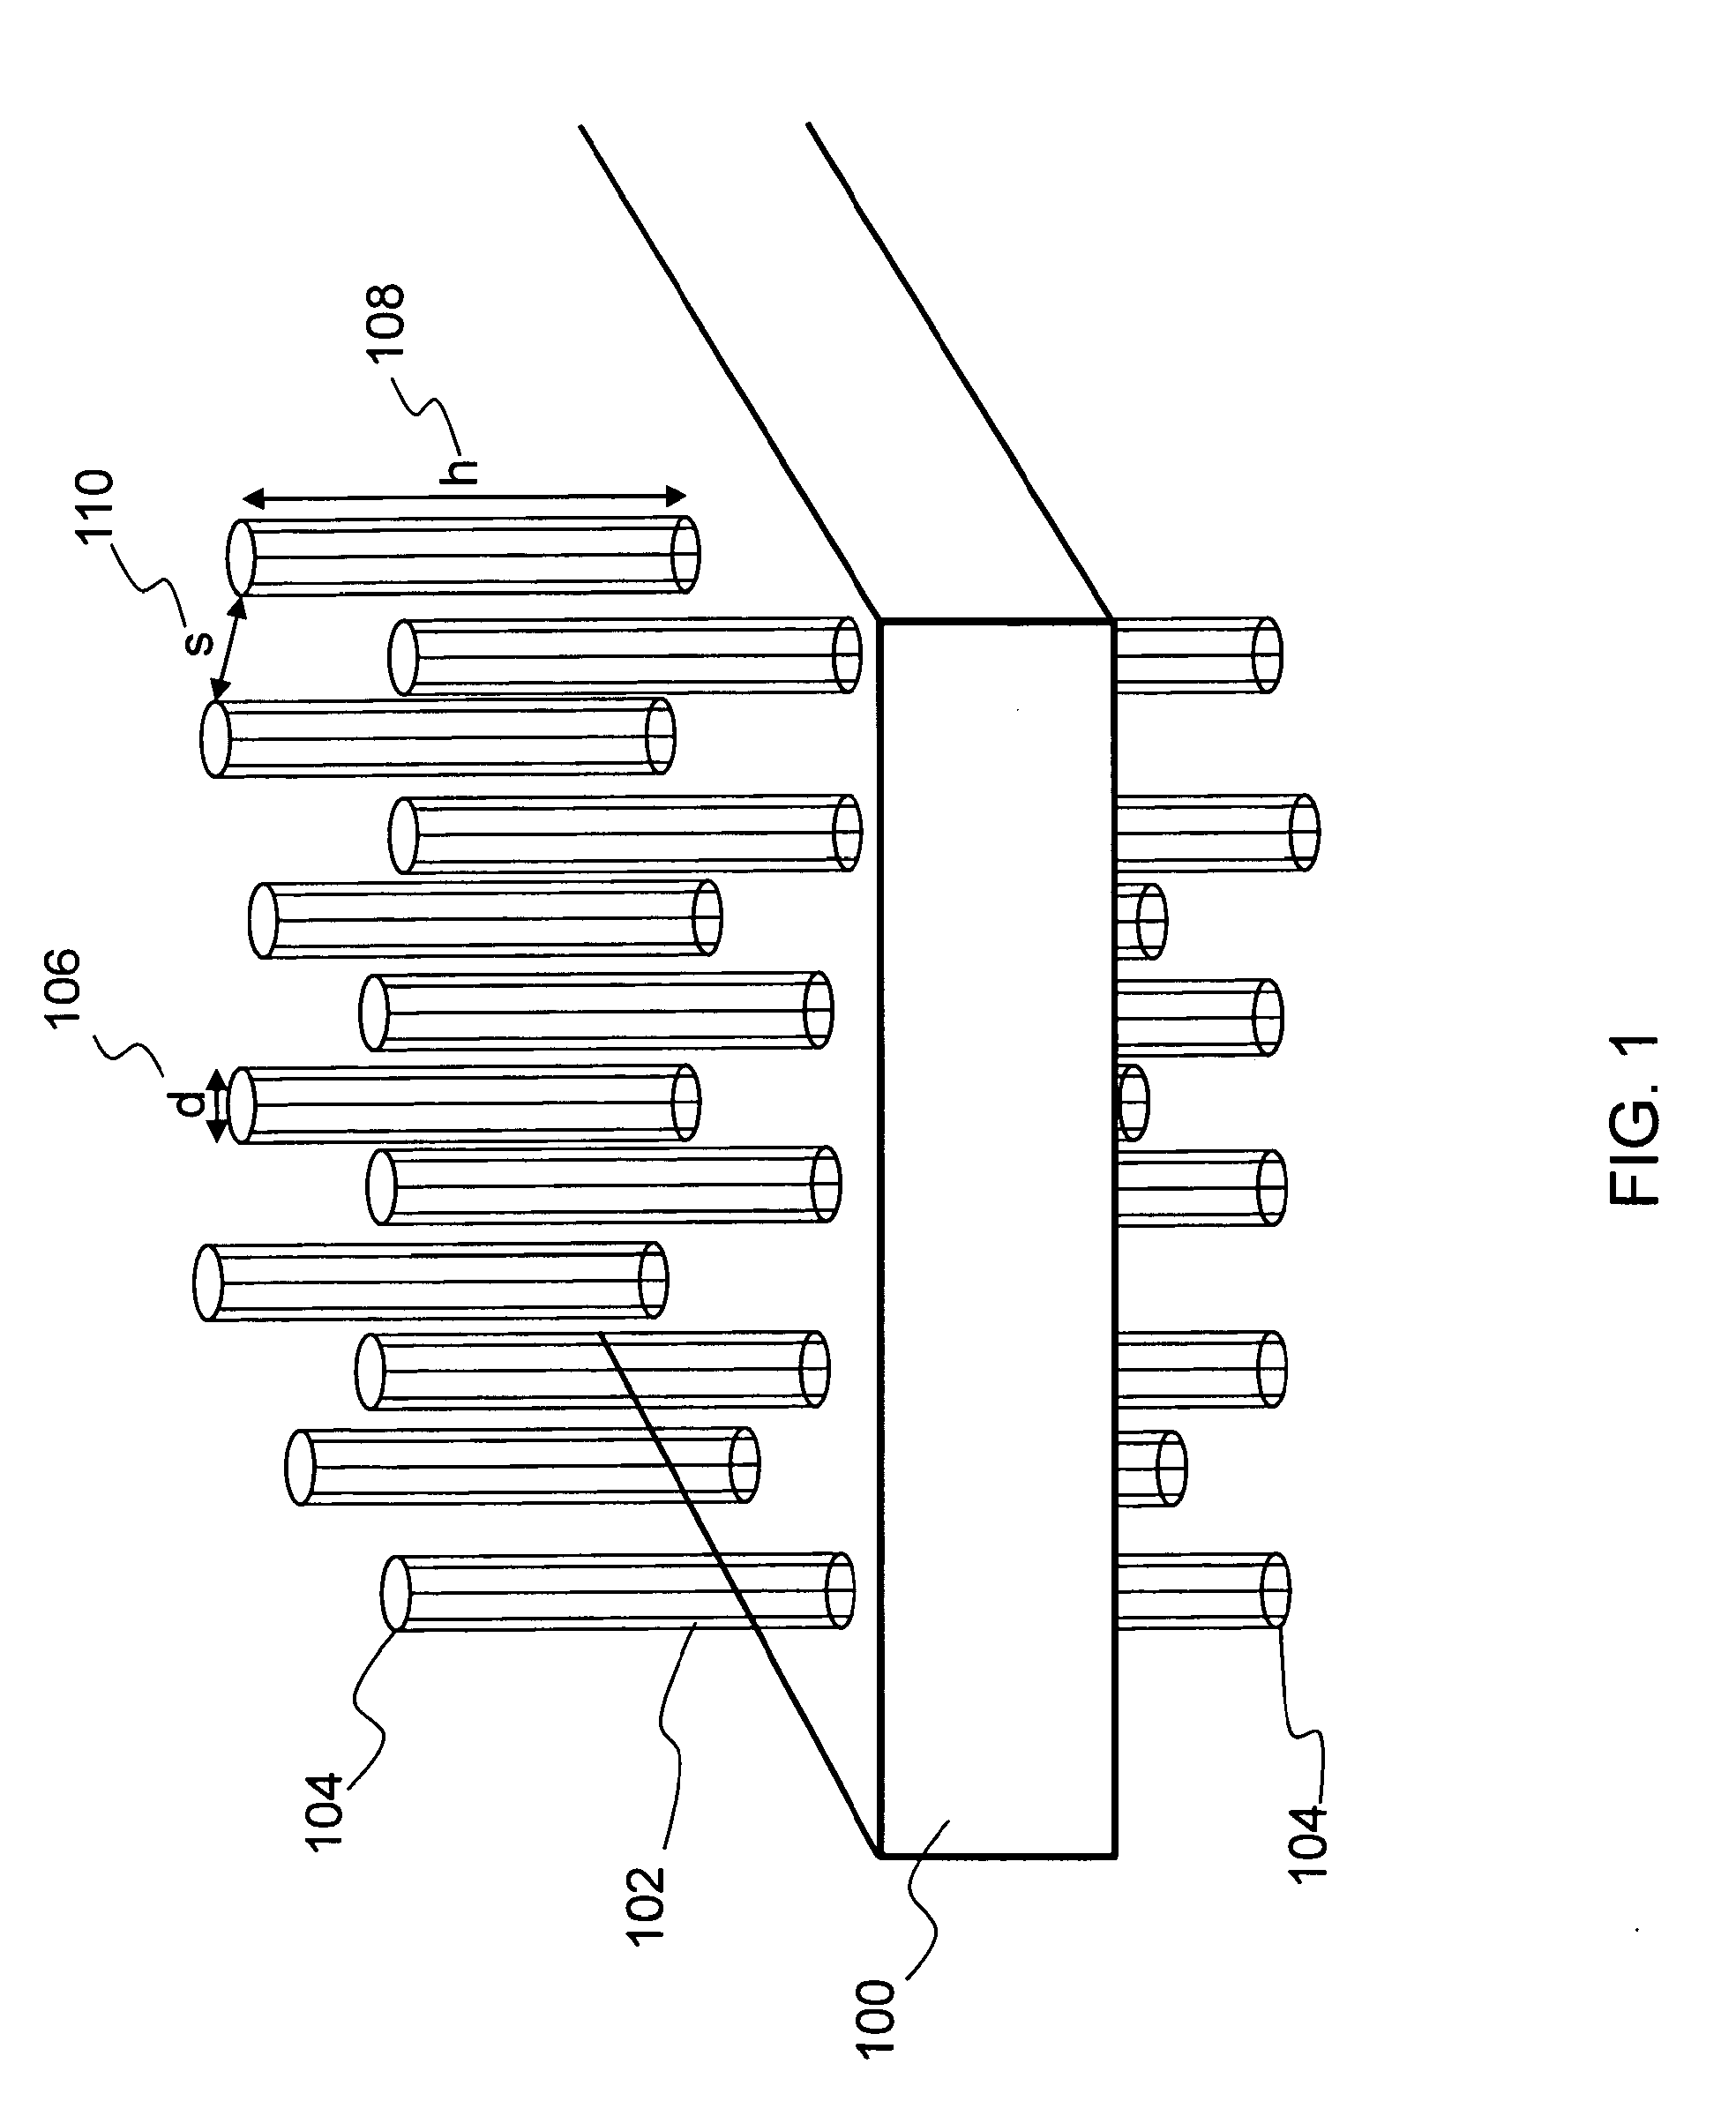 Drug Delivery and Substance Transfer Facilitated by Nano-Enhanced Device Having Aligned Carbon Nanotubes Protruding from Device Surface